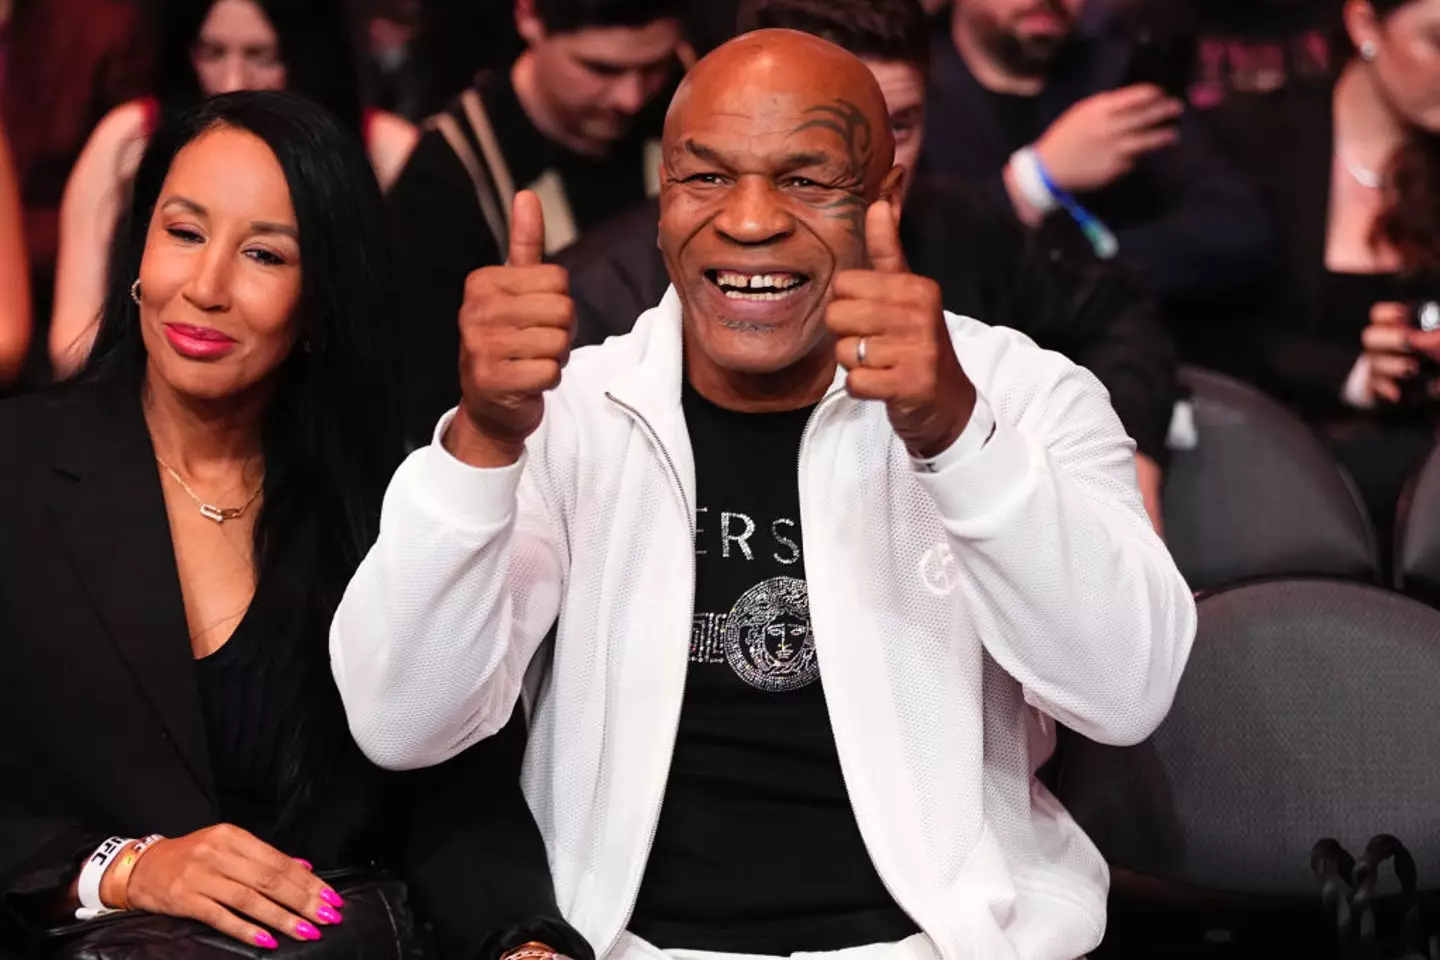 Mike Tyson is preparing to face Jake Paul (Image: Getty)